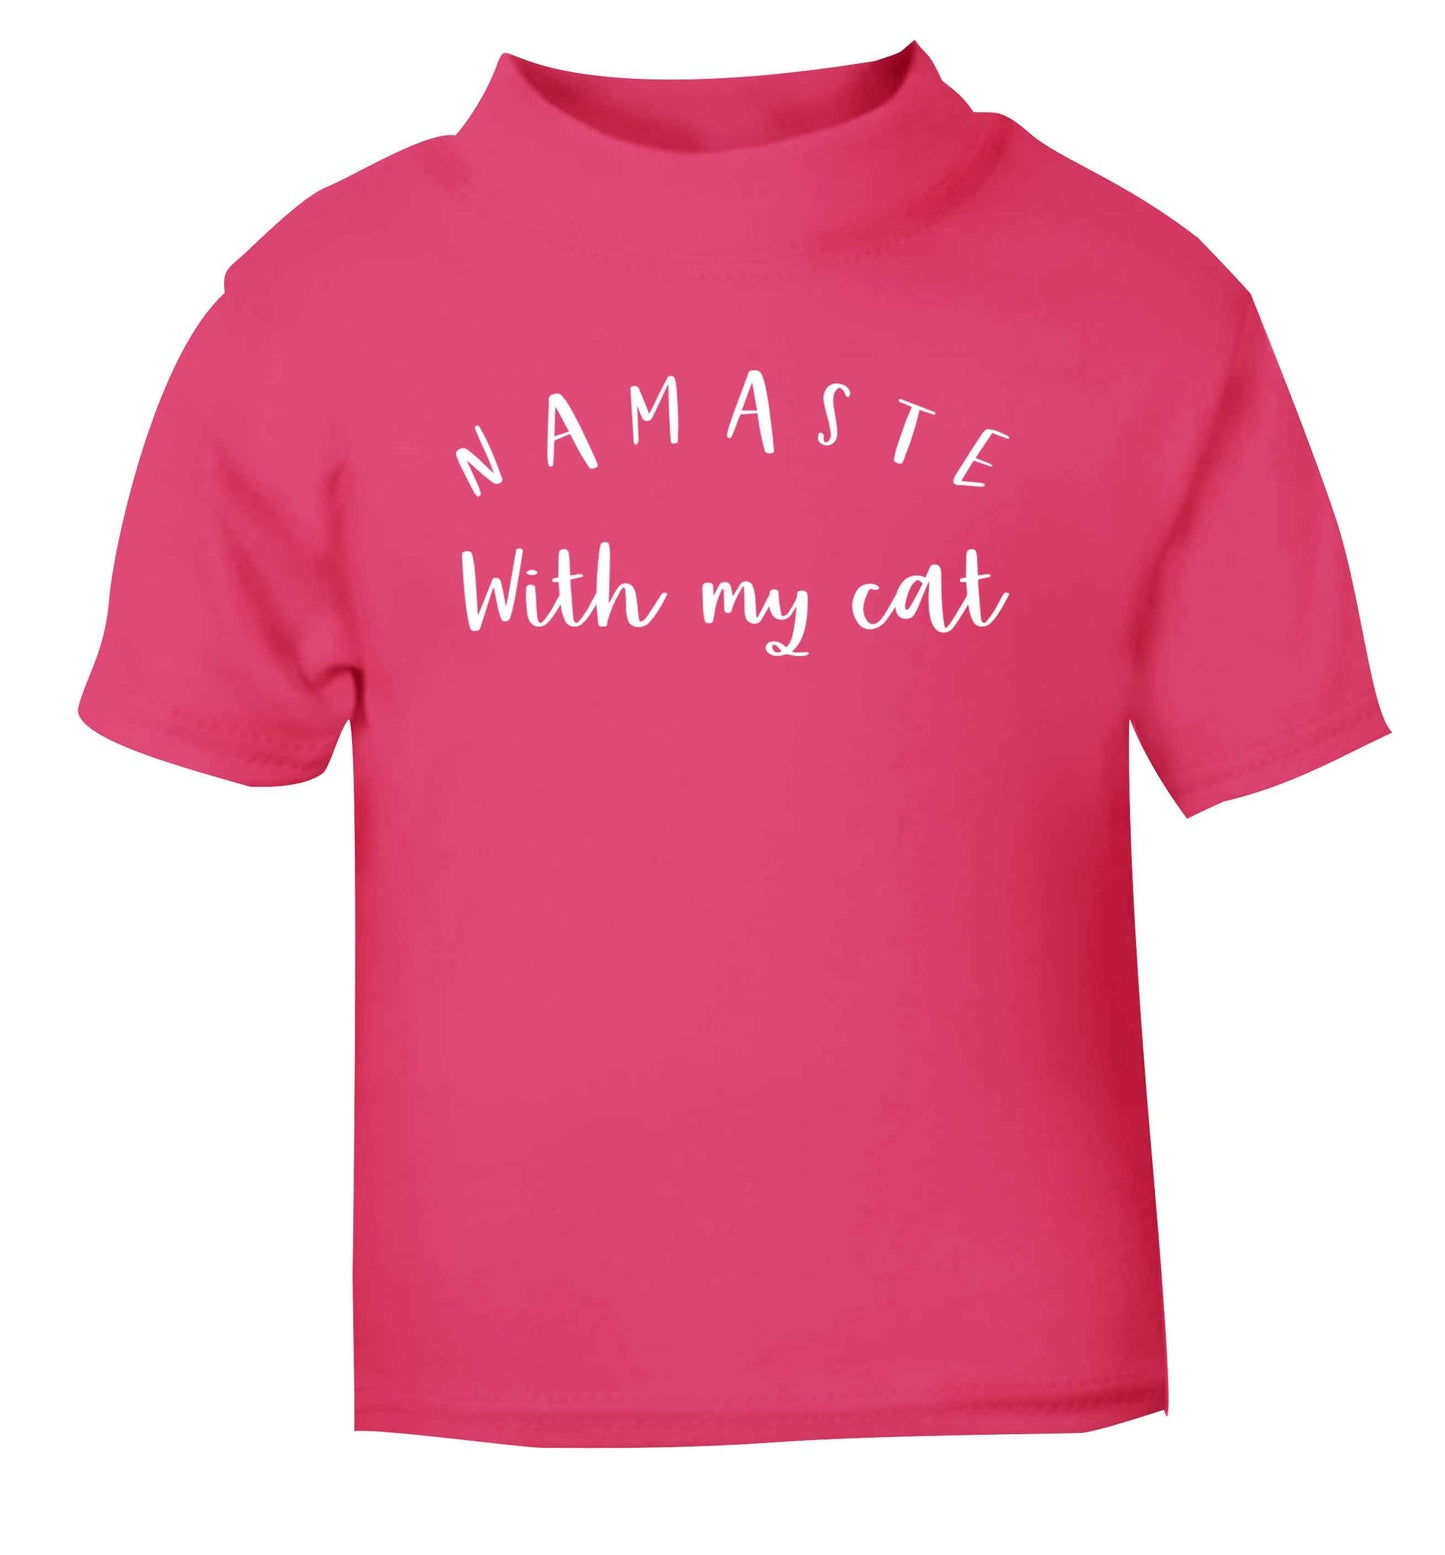 Namaste with my cat pink Baby Toddler Tshirt 2 Years